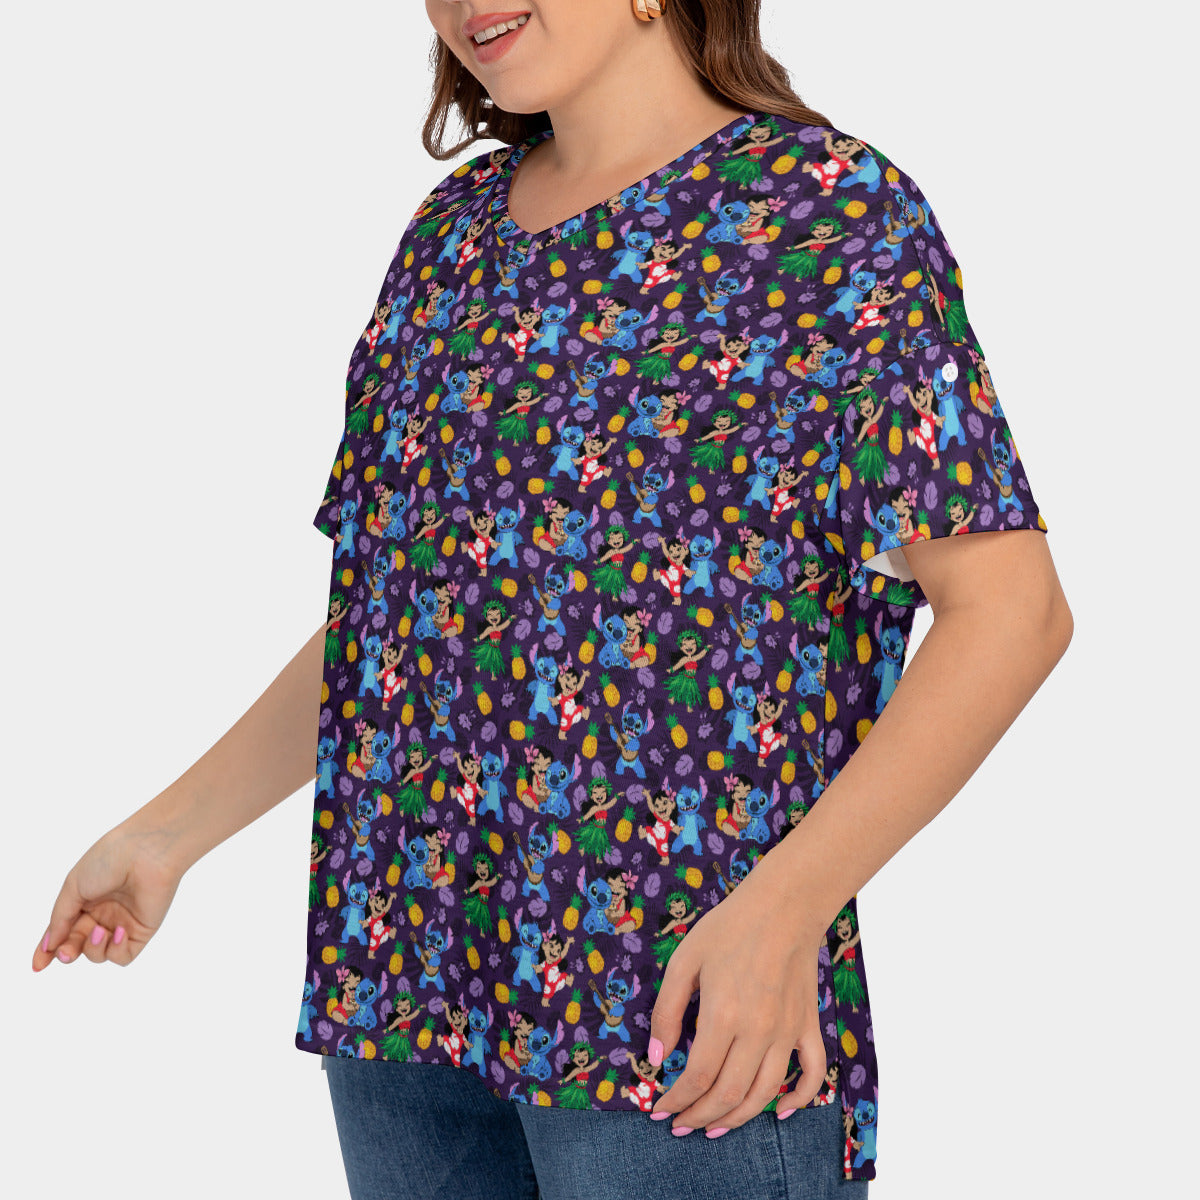 Island Friends Women's Plus Size Short Sleeve T-shirt With Sleeve Loops